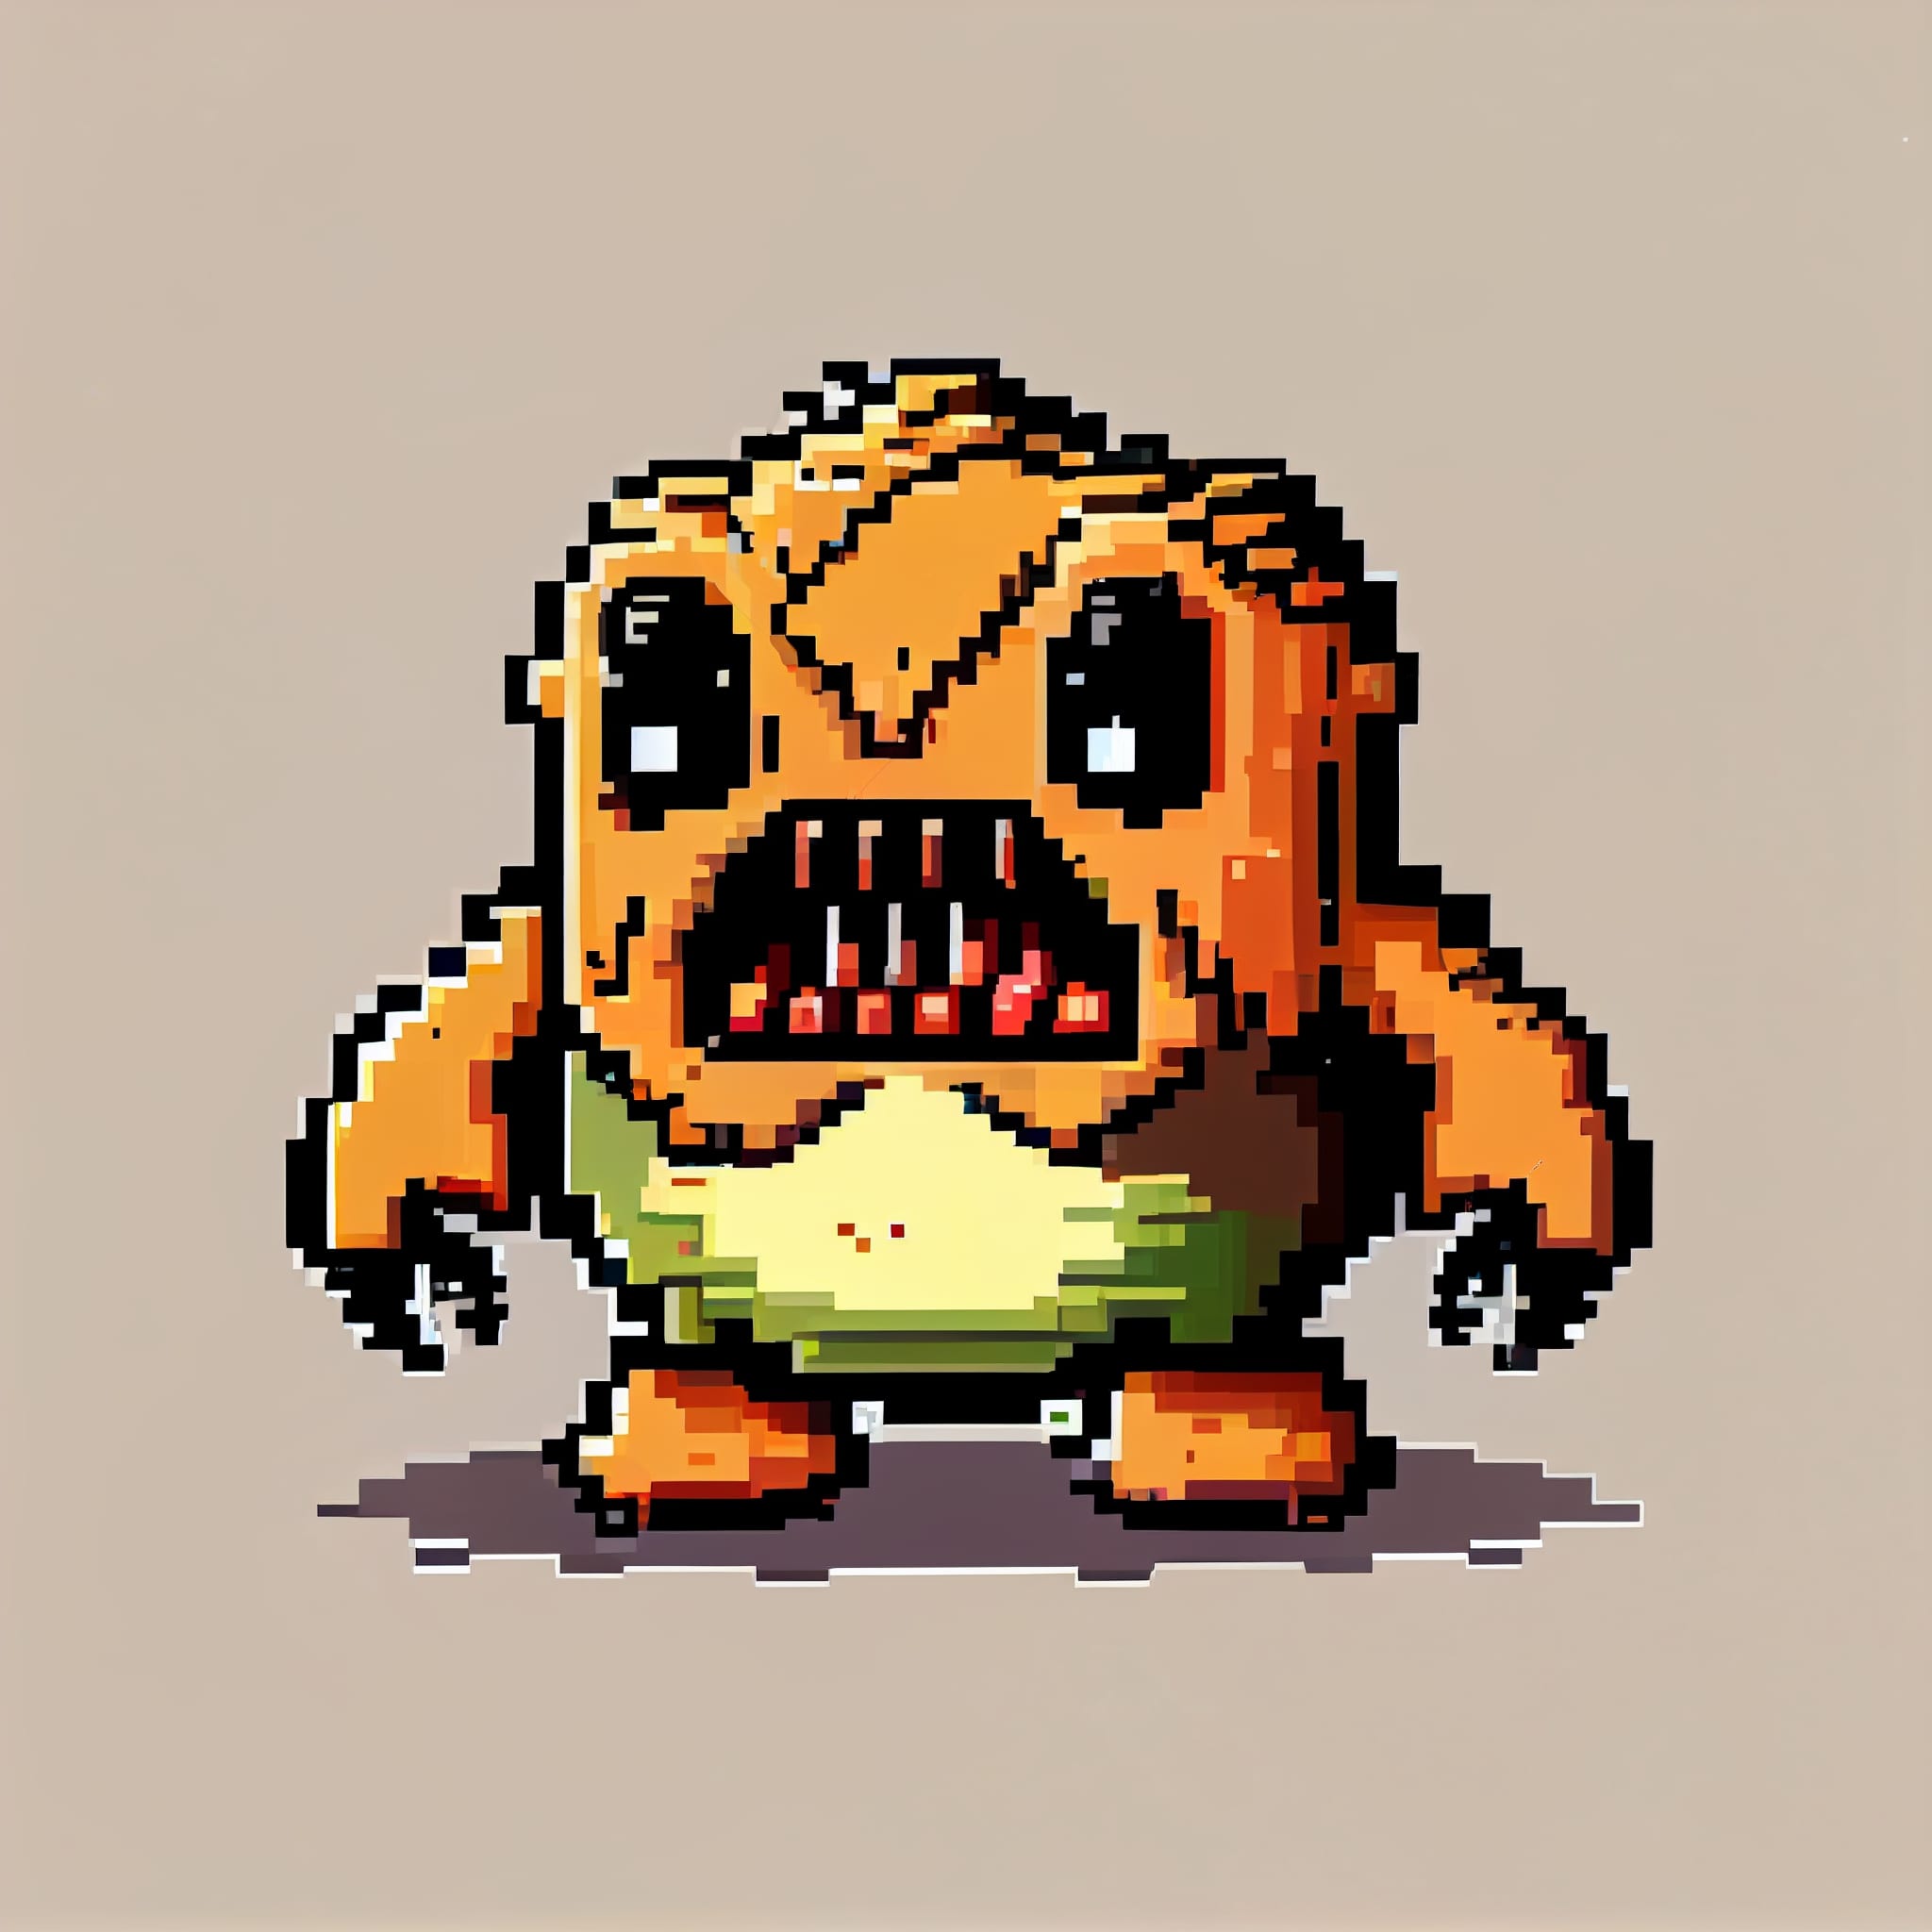 Pixel art picture of a monster eating a piece of broccoli.